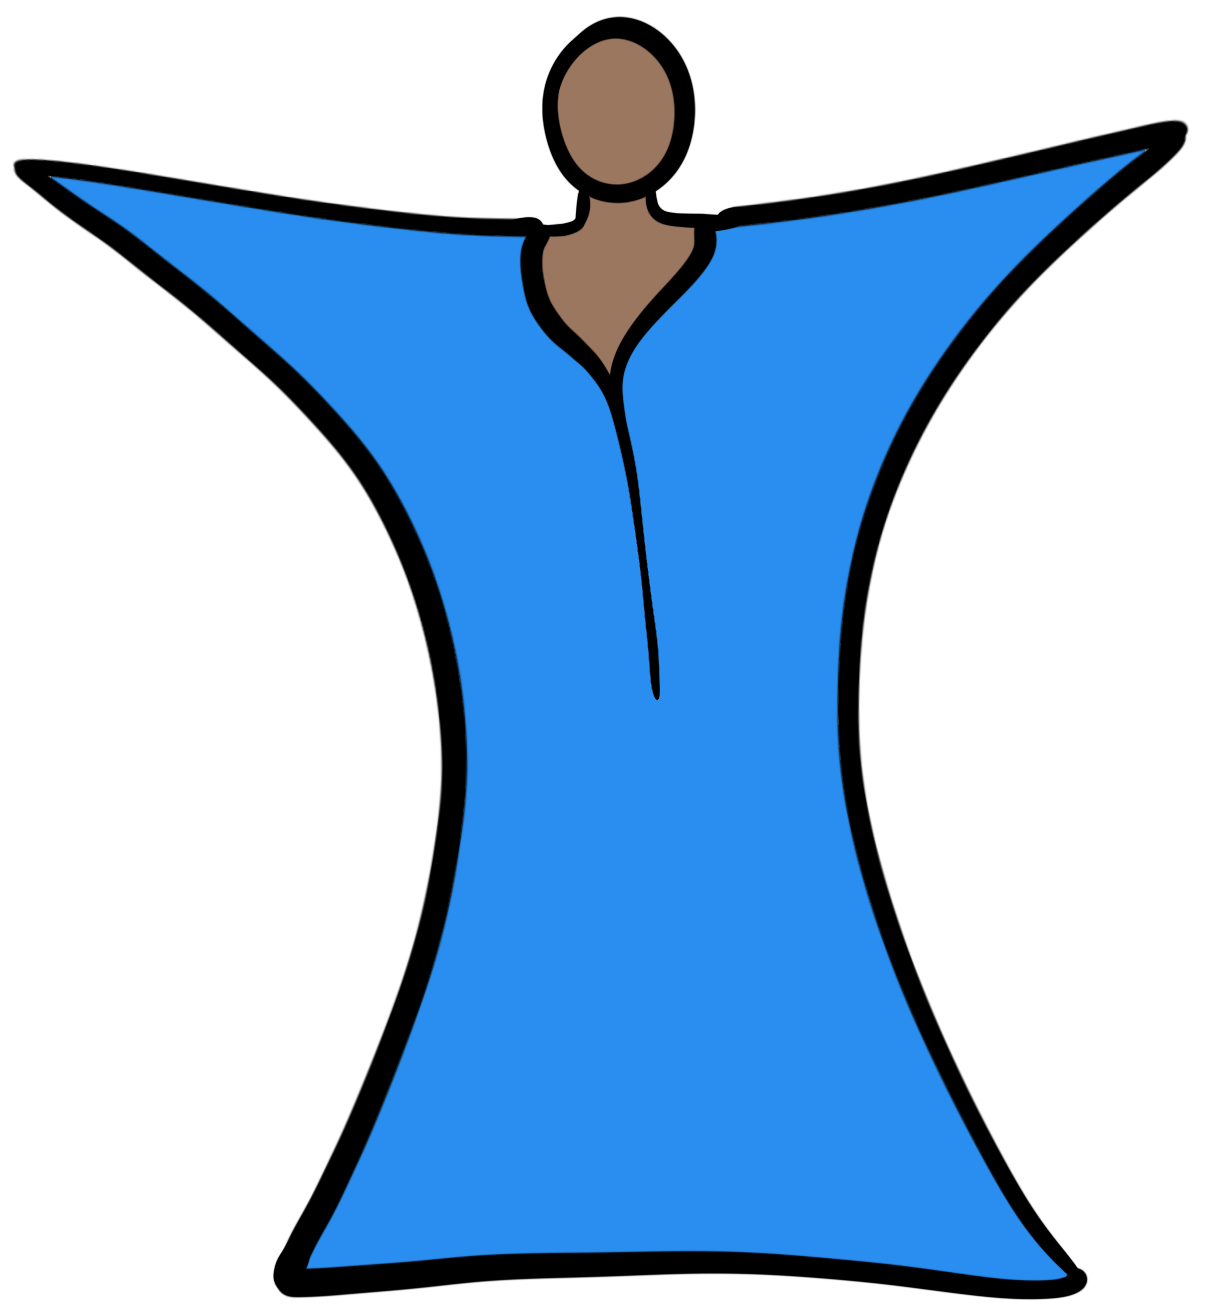 A person with brown skin using a blue body sock.